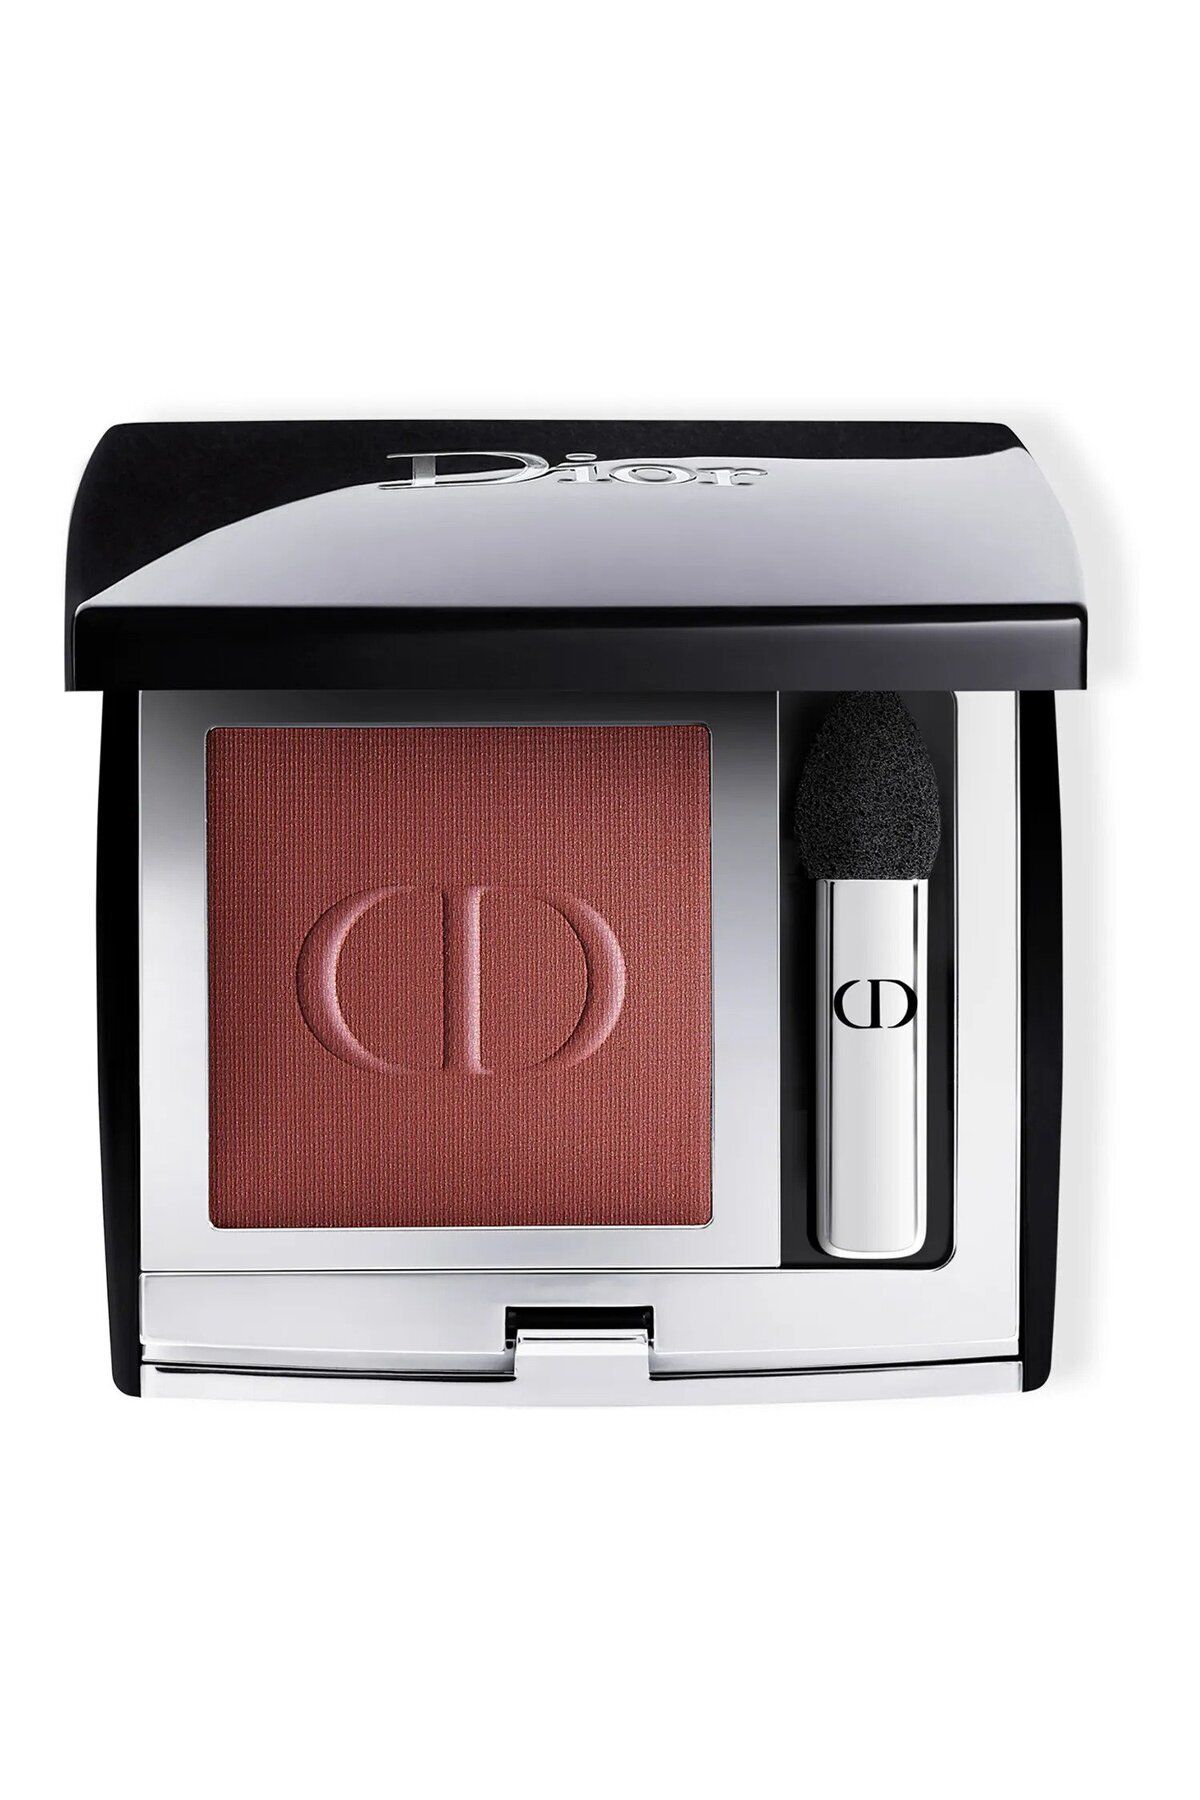 Dior MONO COULEUR COUTURE - ALOE VERA AND PİNE OİL-EYESHADOW THAT PLUMPS THE EYEBROWS 2 GR PSSN2101